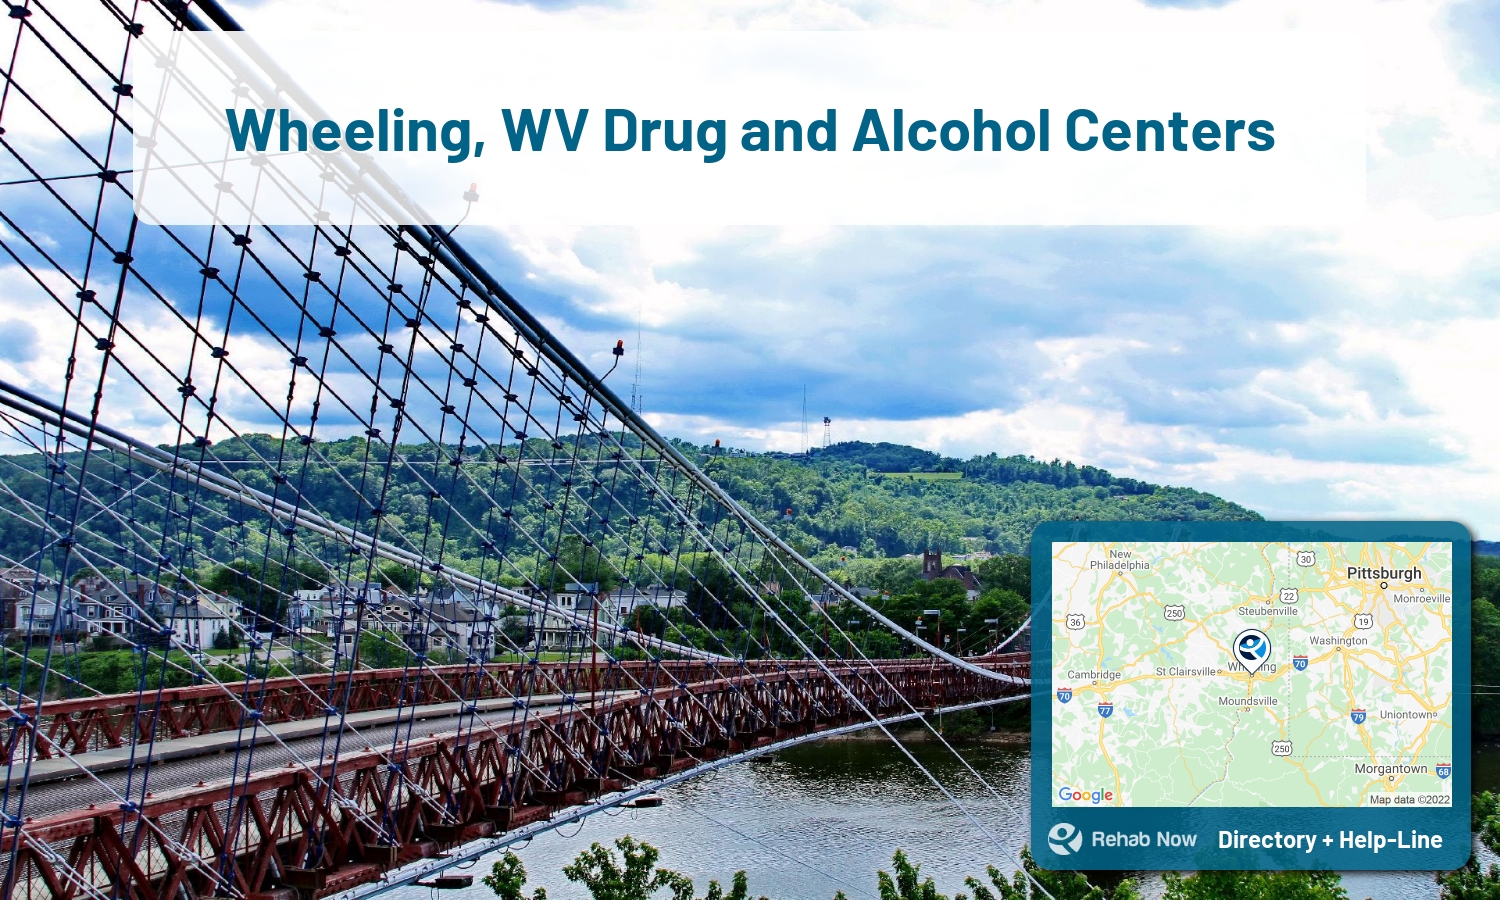 Ready to pick a rehab center in Wheeling? Get off alcohol, opiates, and other drugs, by selecting top drug rehab centers in West Virginia